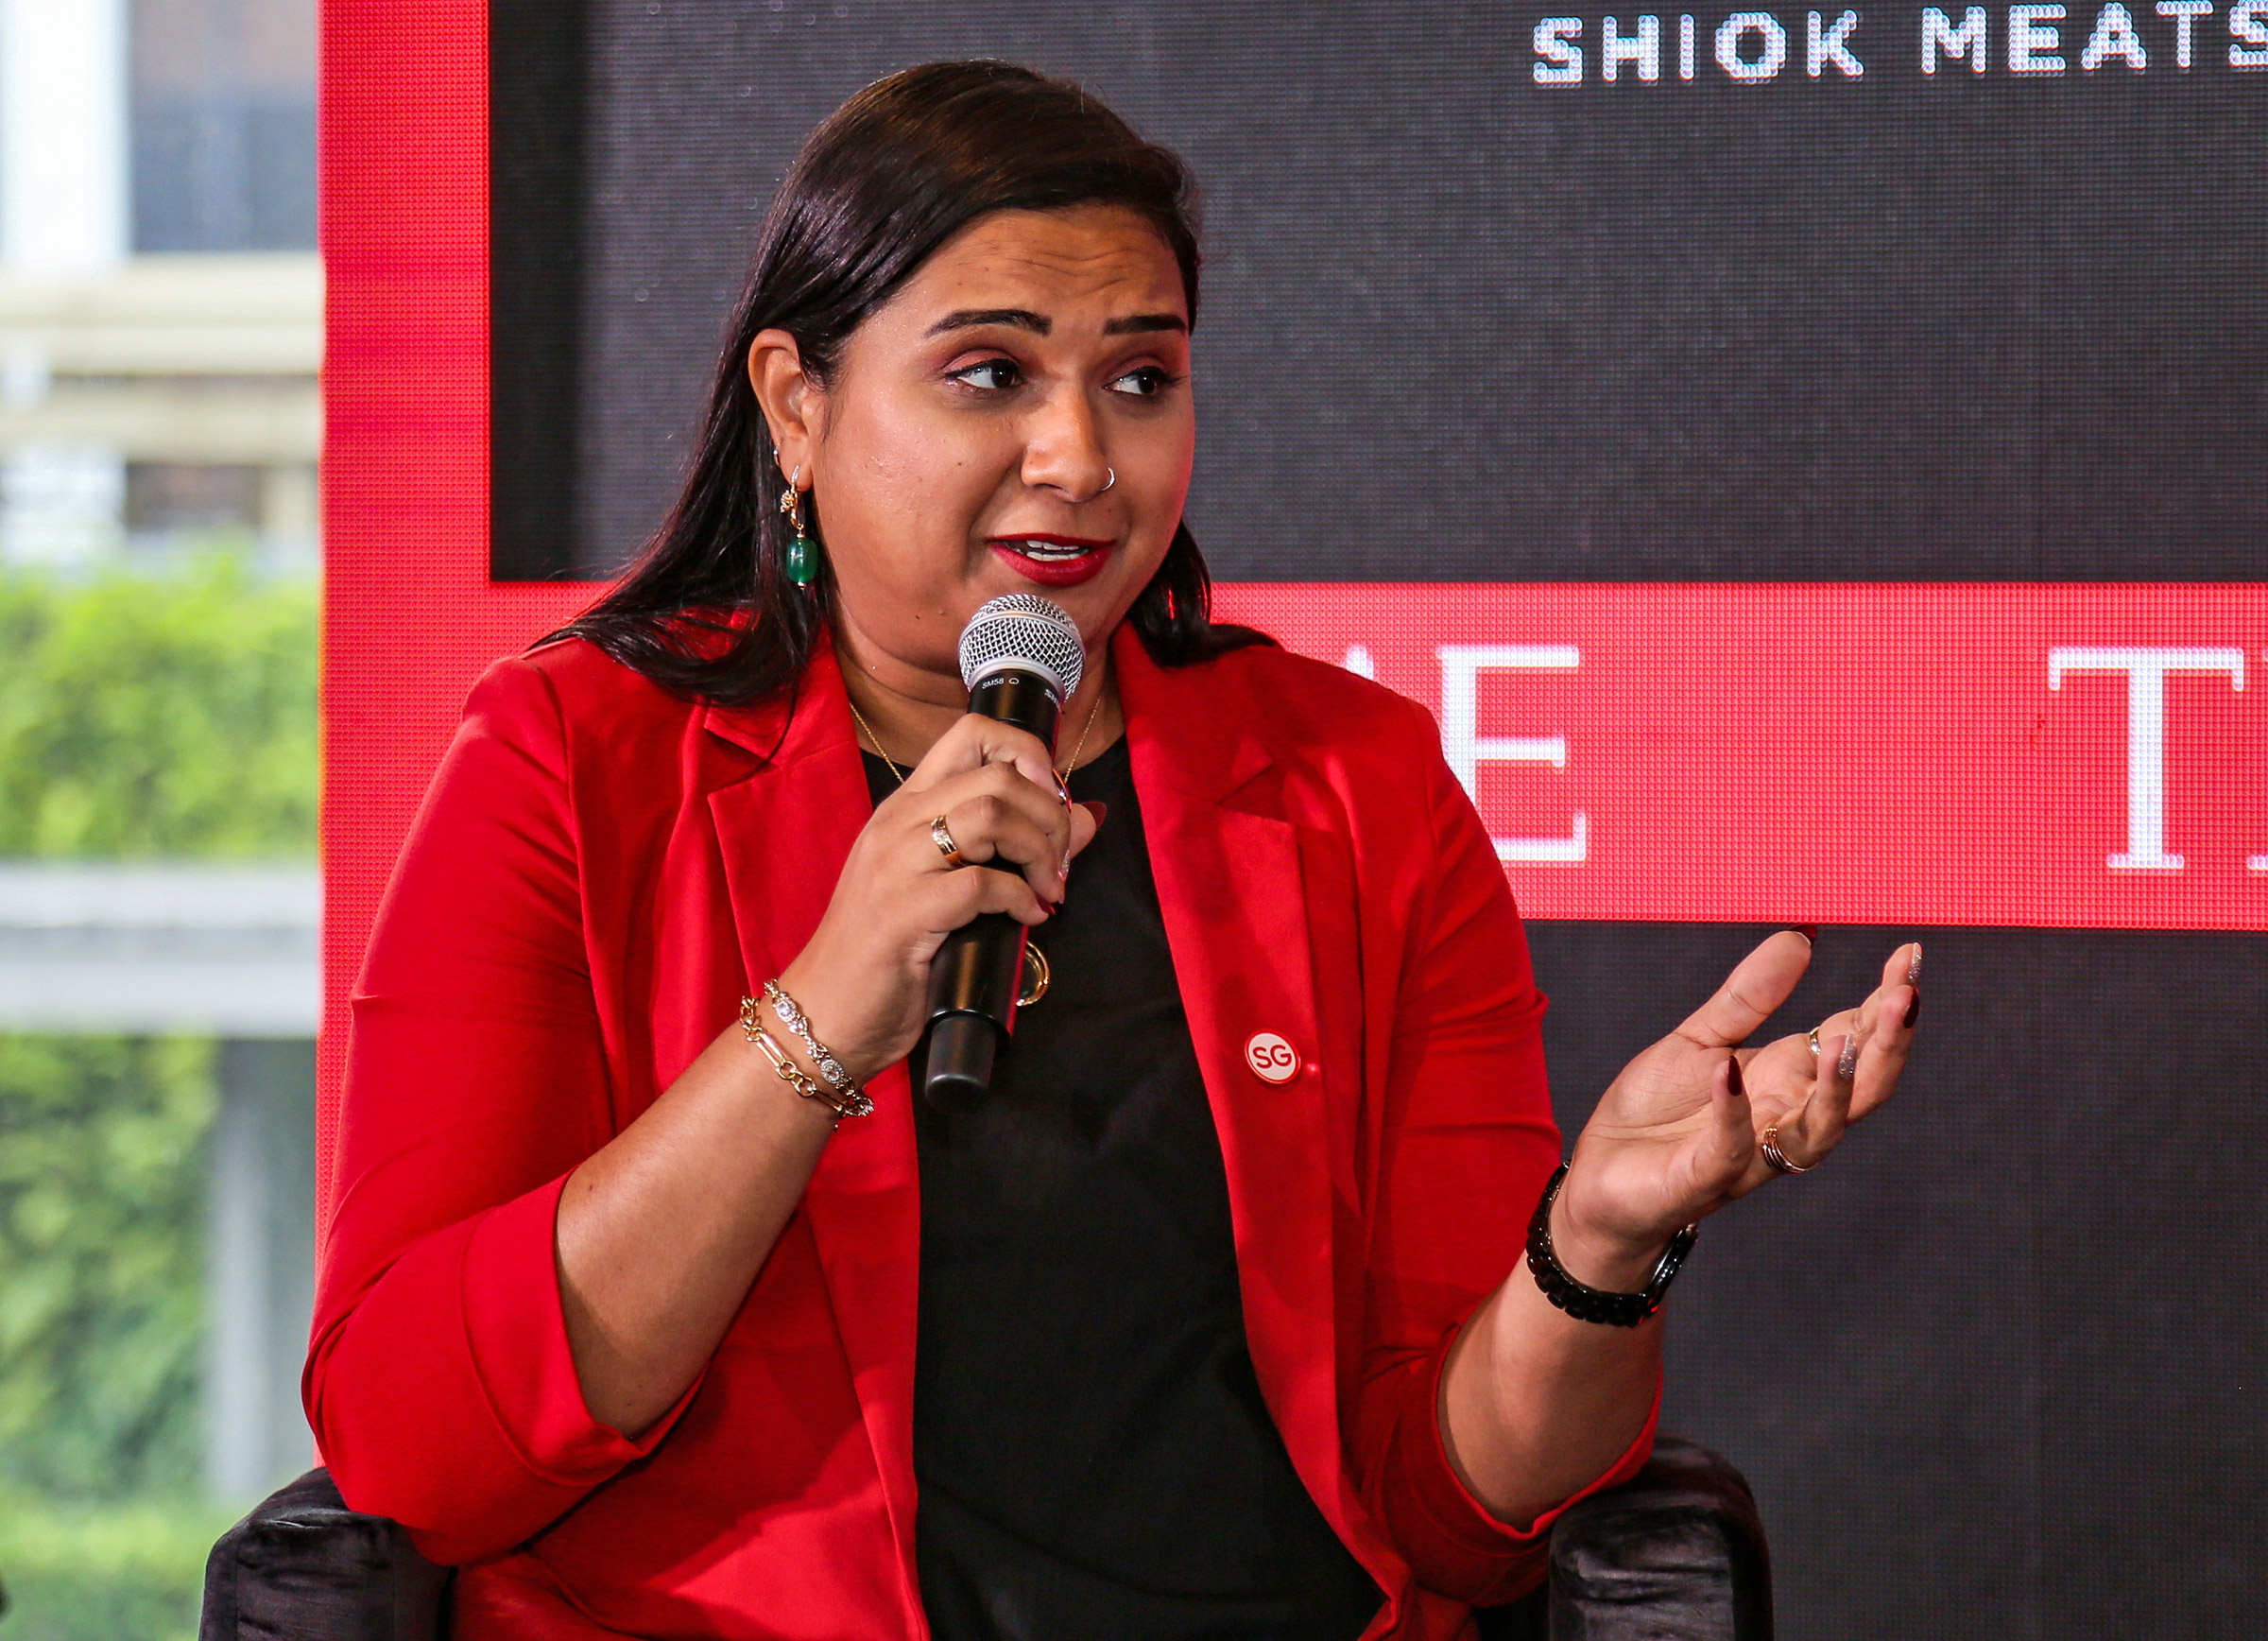 Sandhya Sriram, Group CEO, Chairman & Co-Founder, Shiok Meats speaks during the TIME100 Leadership Forum on October 02, 2022 in Singapore. (Ore Huiying—Getty Images for TIME)